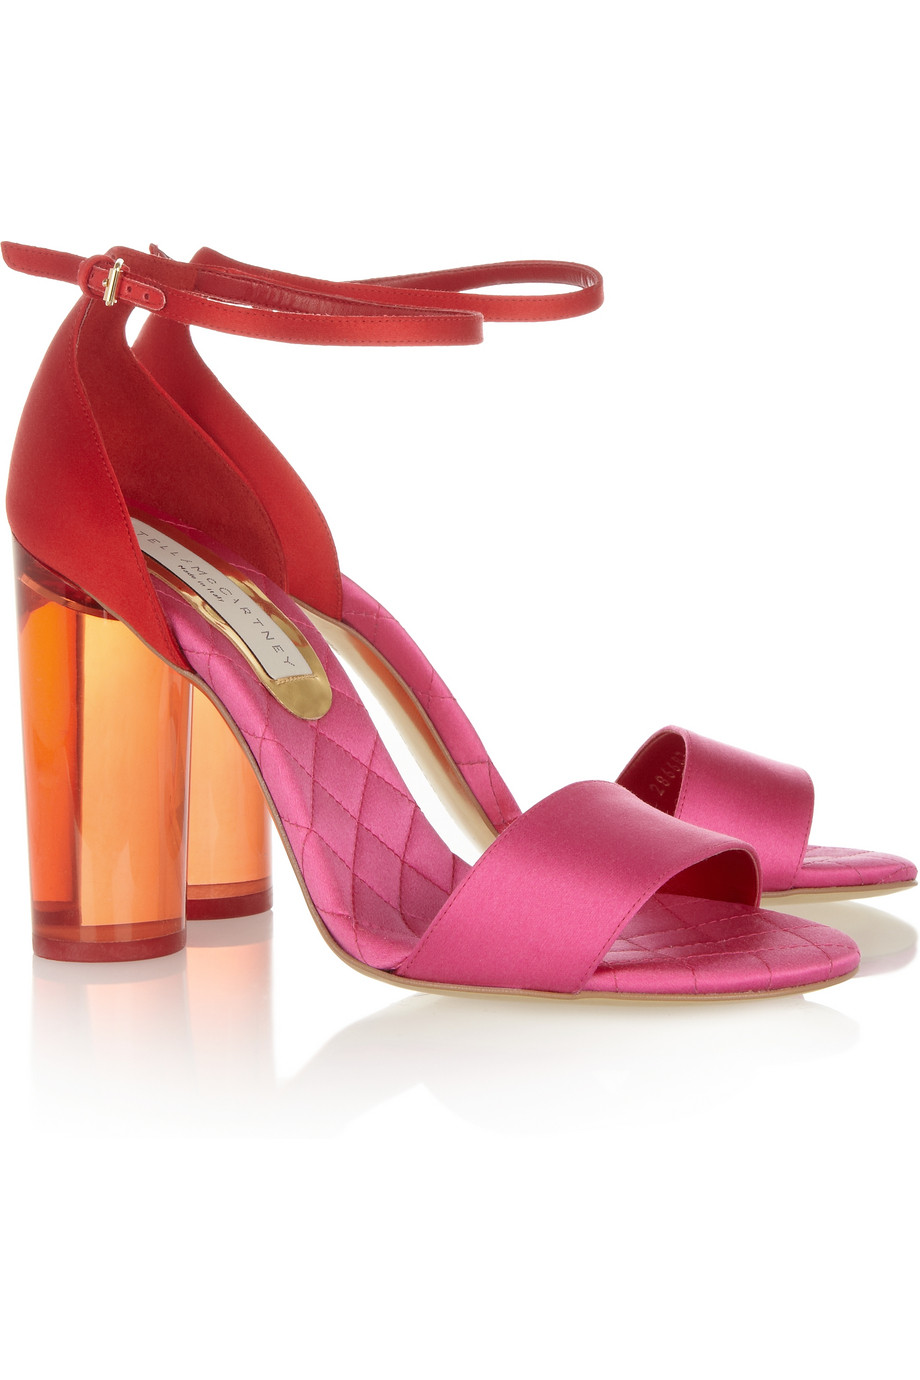 Stella mccartney Perspex-heeled Two-tone Satin Sandals in Pink | Lyst